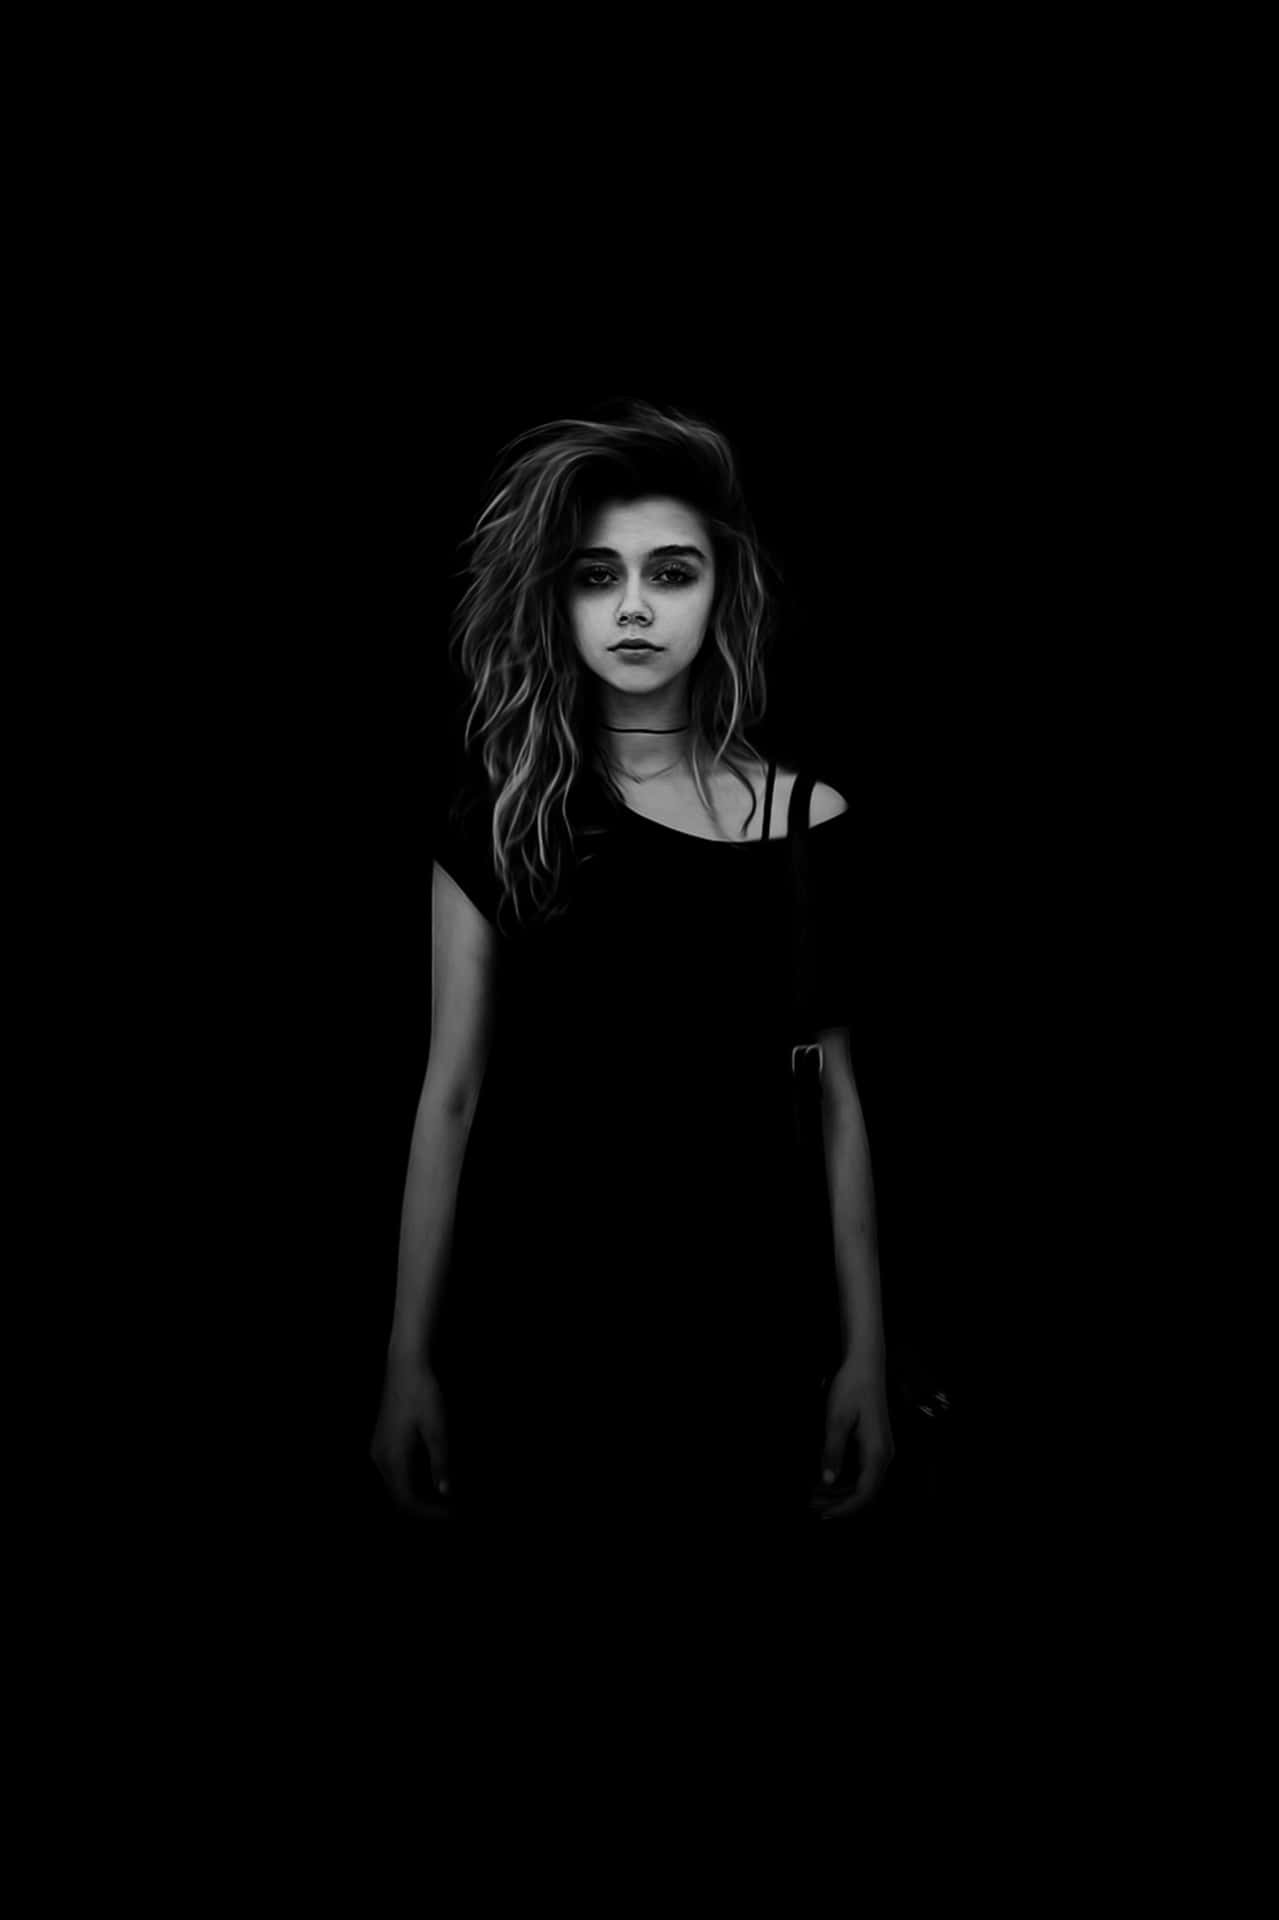 Mysterious Womanin Blackand White Background